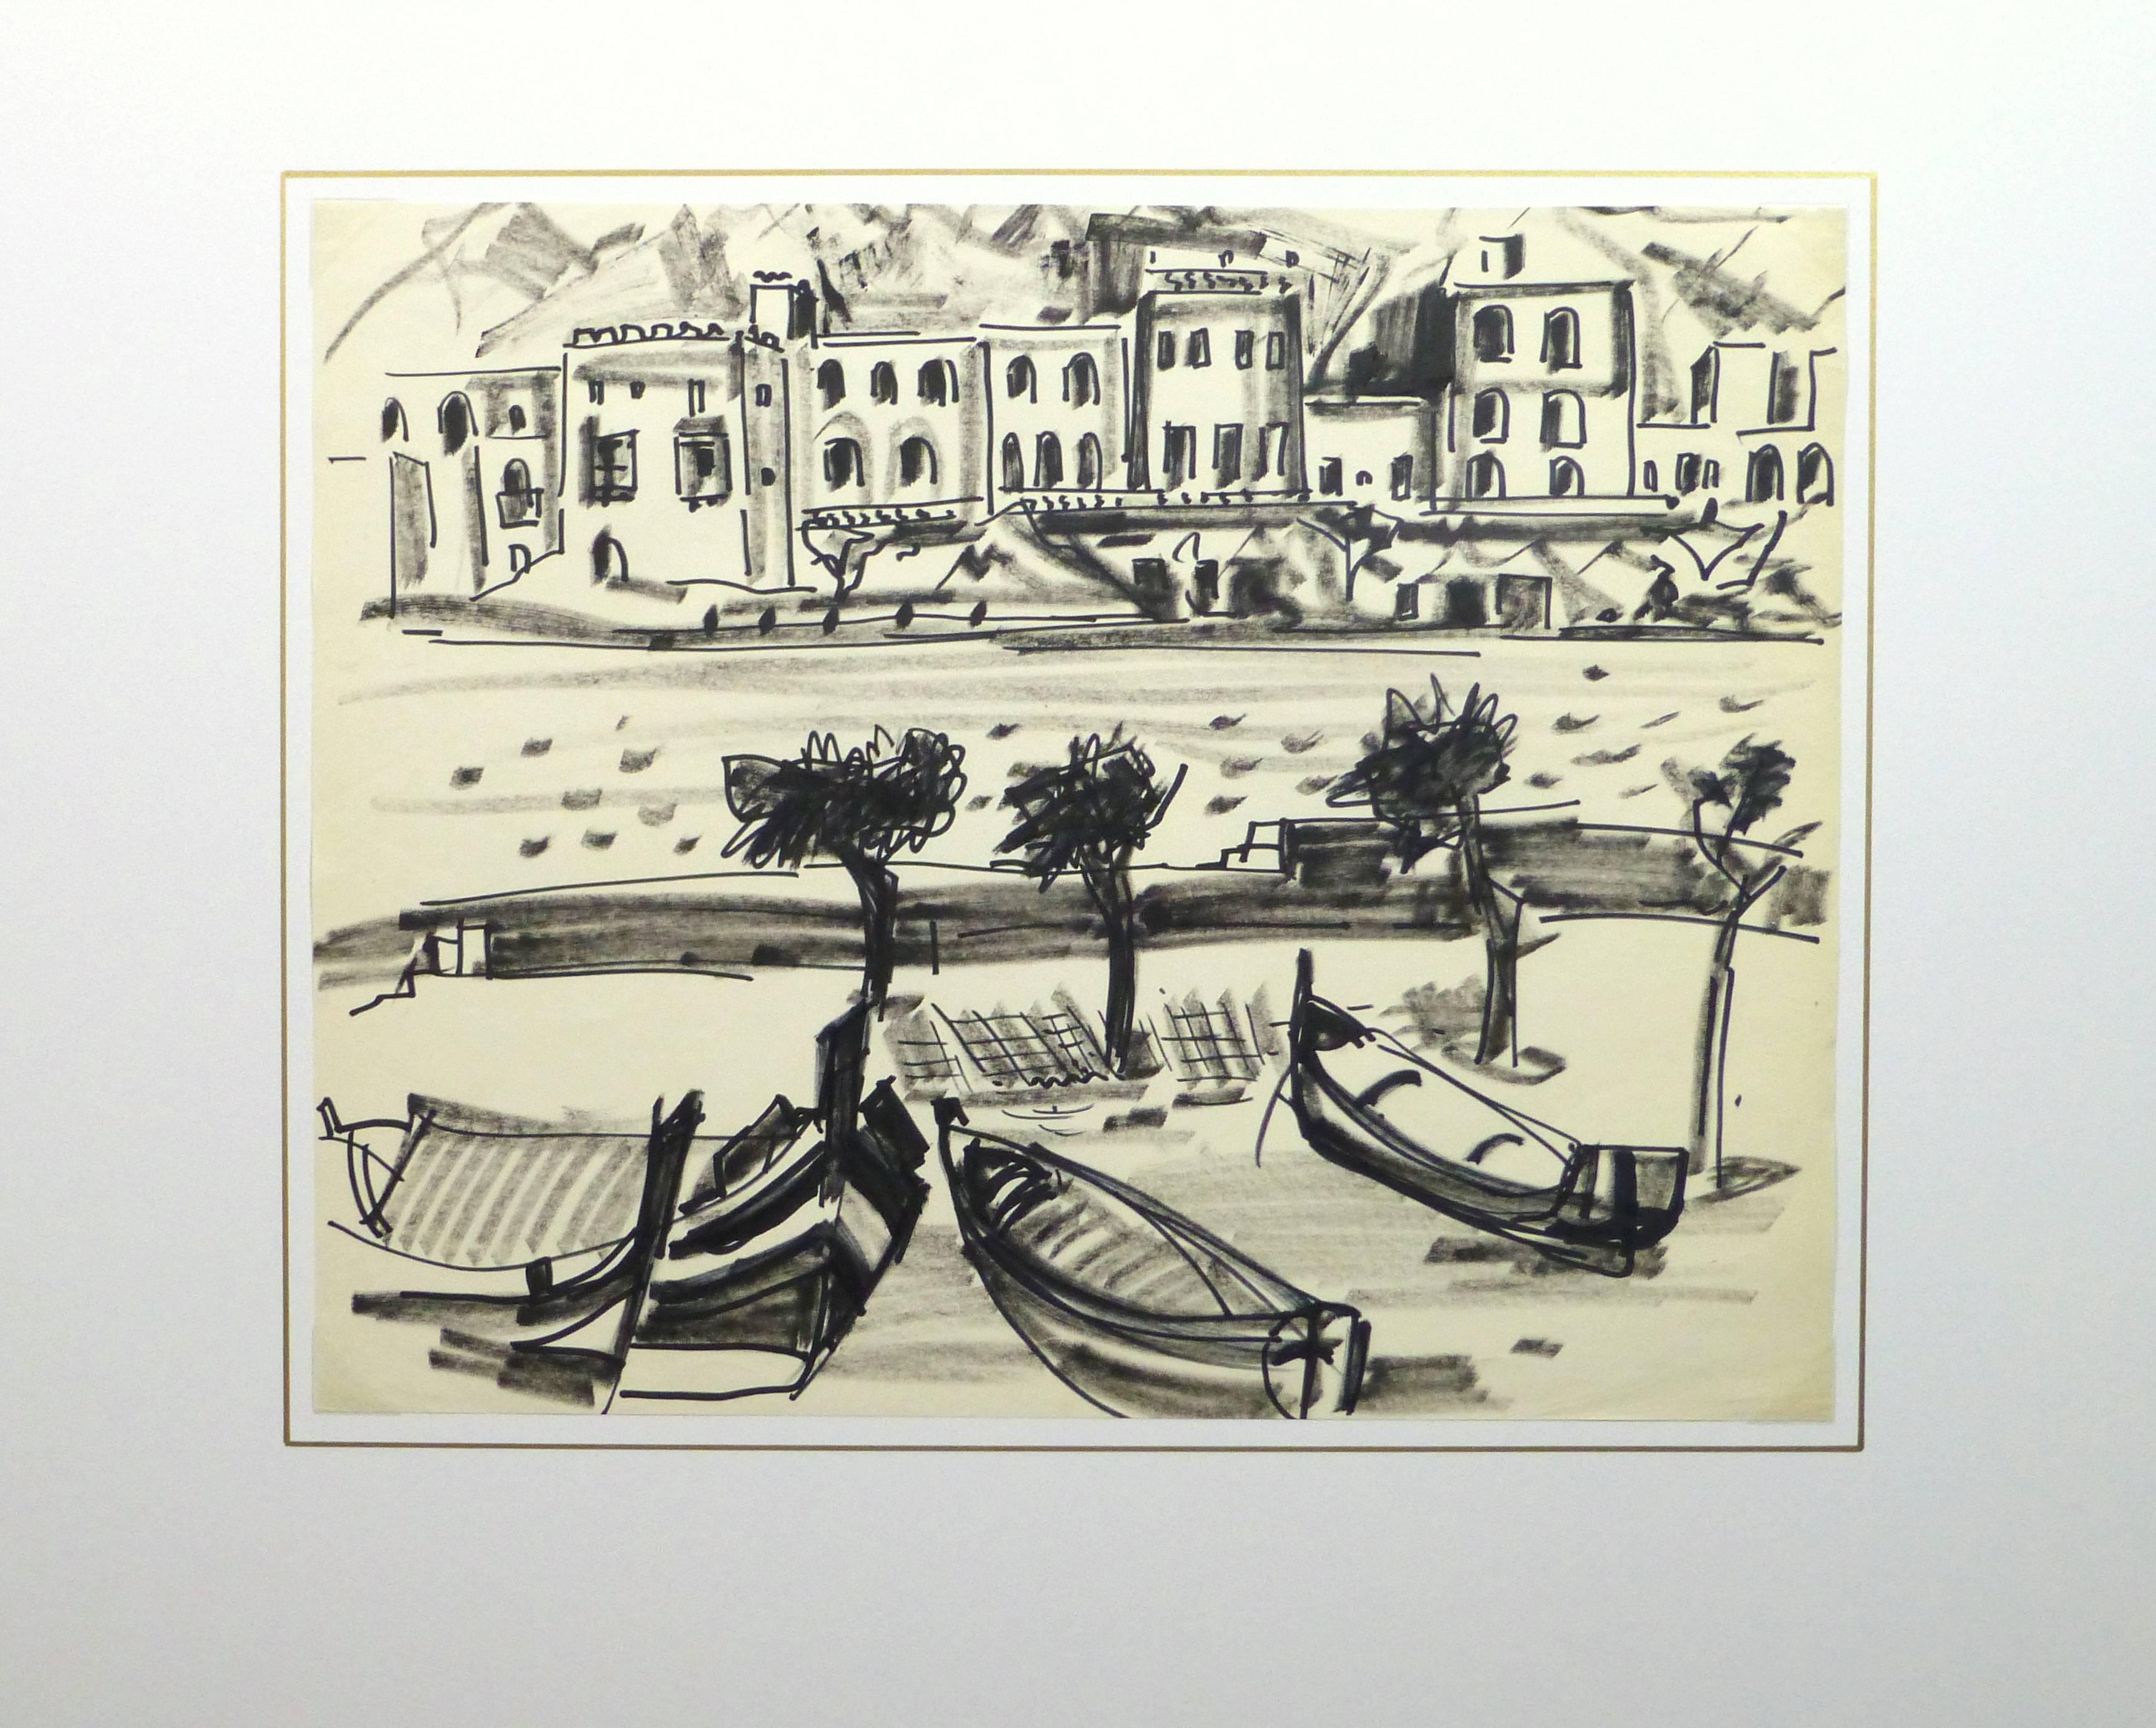 Large black and white ink drawing of a villas lining the edge of a calm river by Jean Baptiste Grancher, circa 1960. 

Original artwork on paper displayed on a white mat with a gold border. Archival plastic sleeve and Certificate of Authenticity